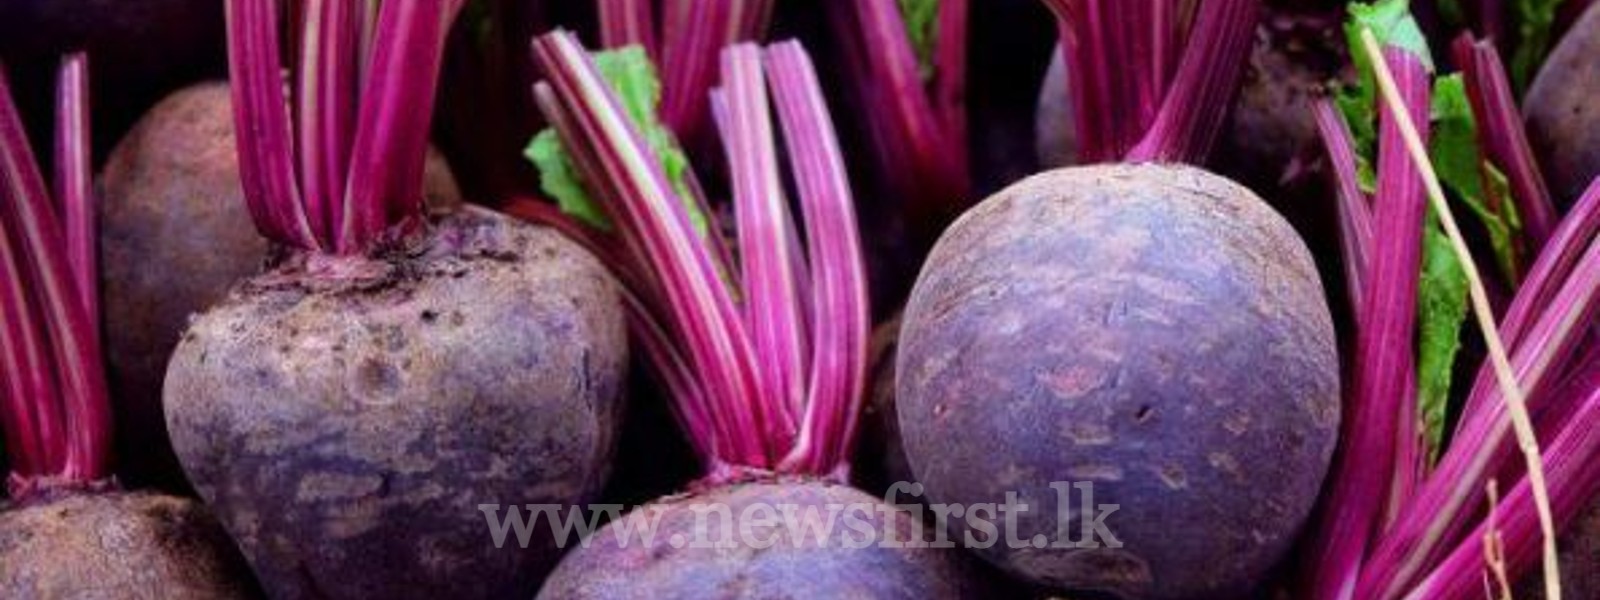 Imported Beet Root in local markets, only UL allowed to import fresh vegetables